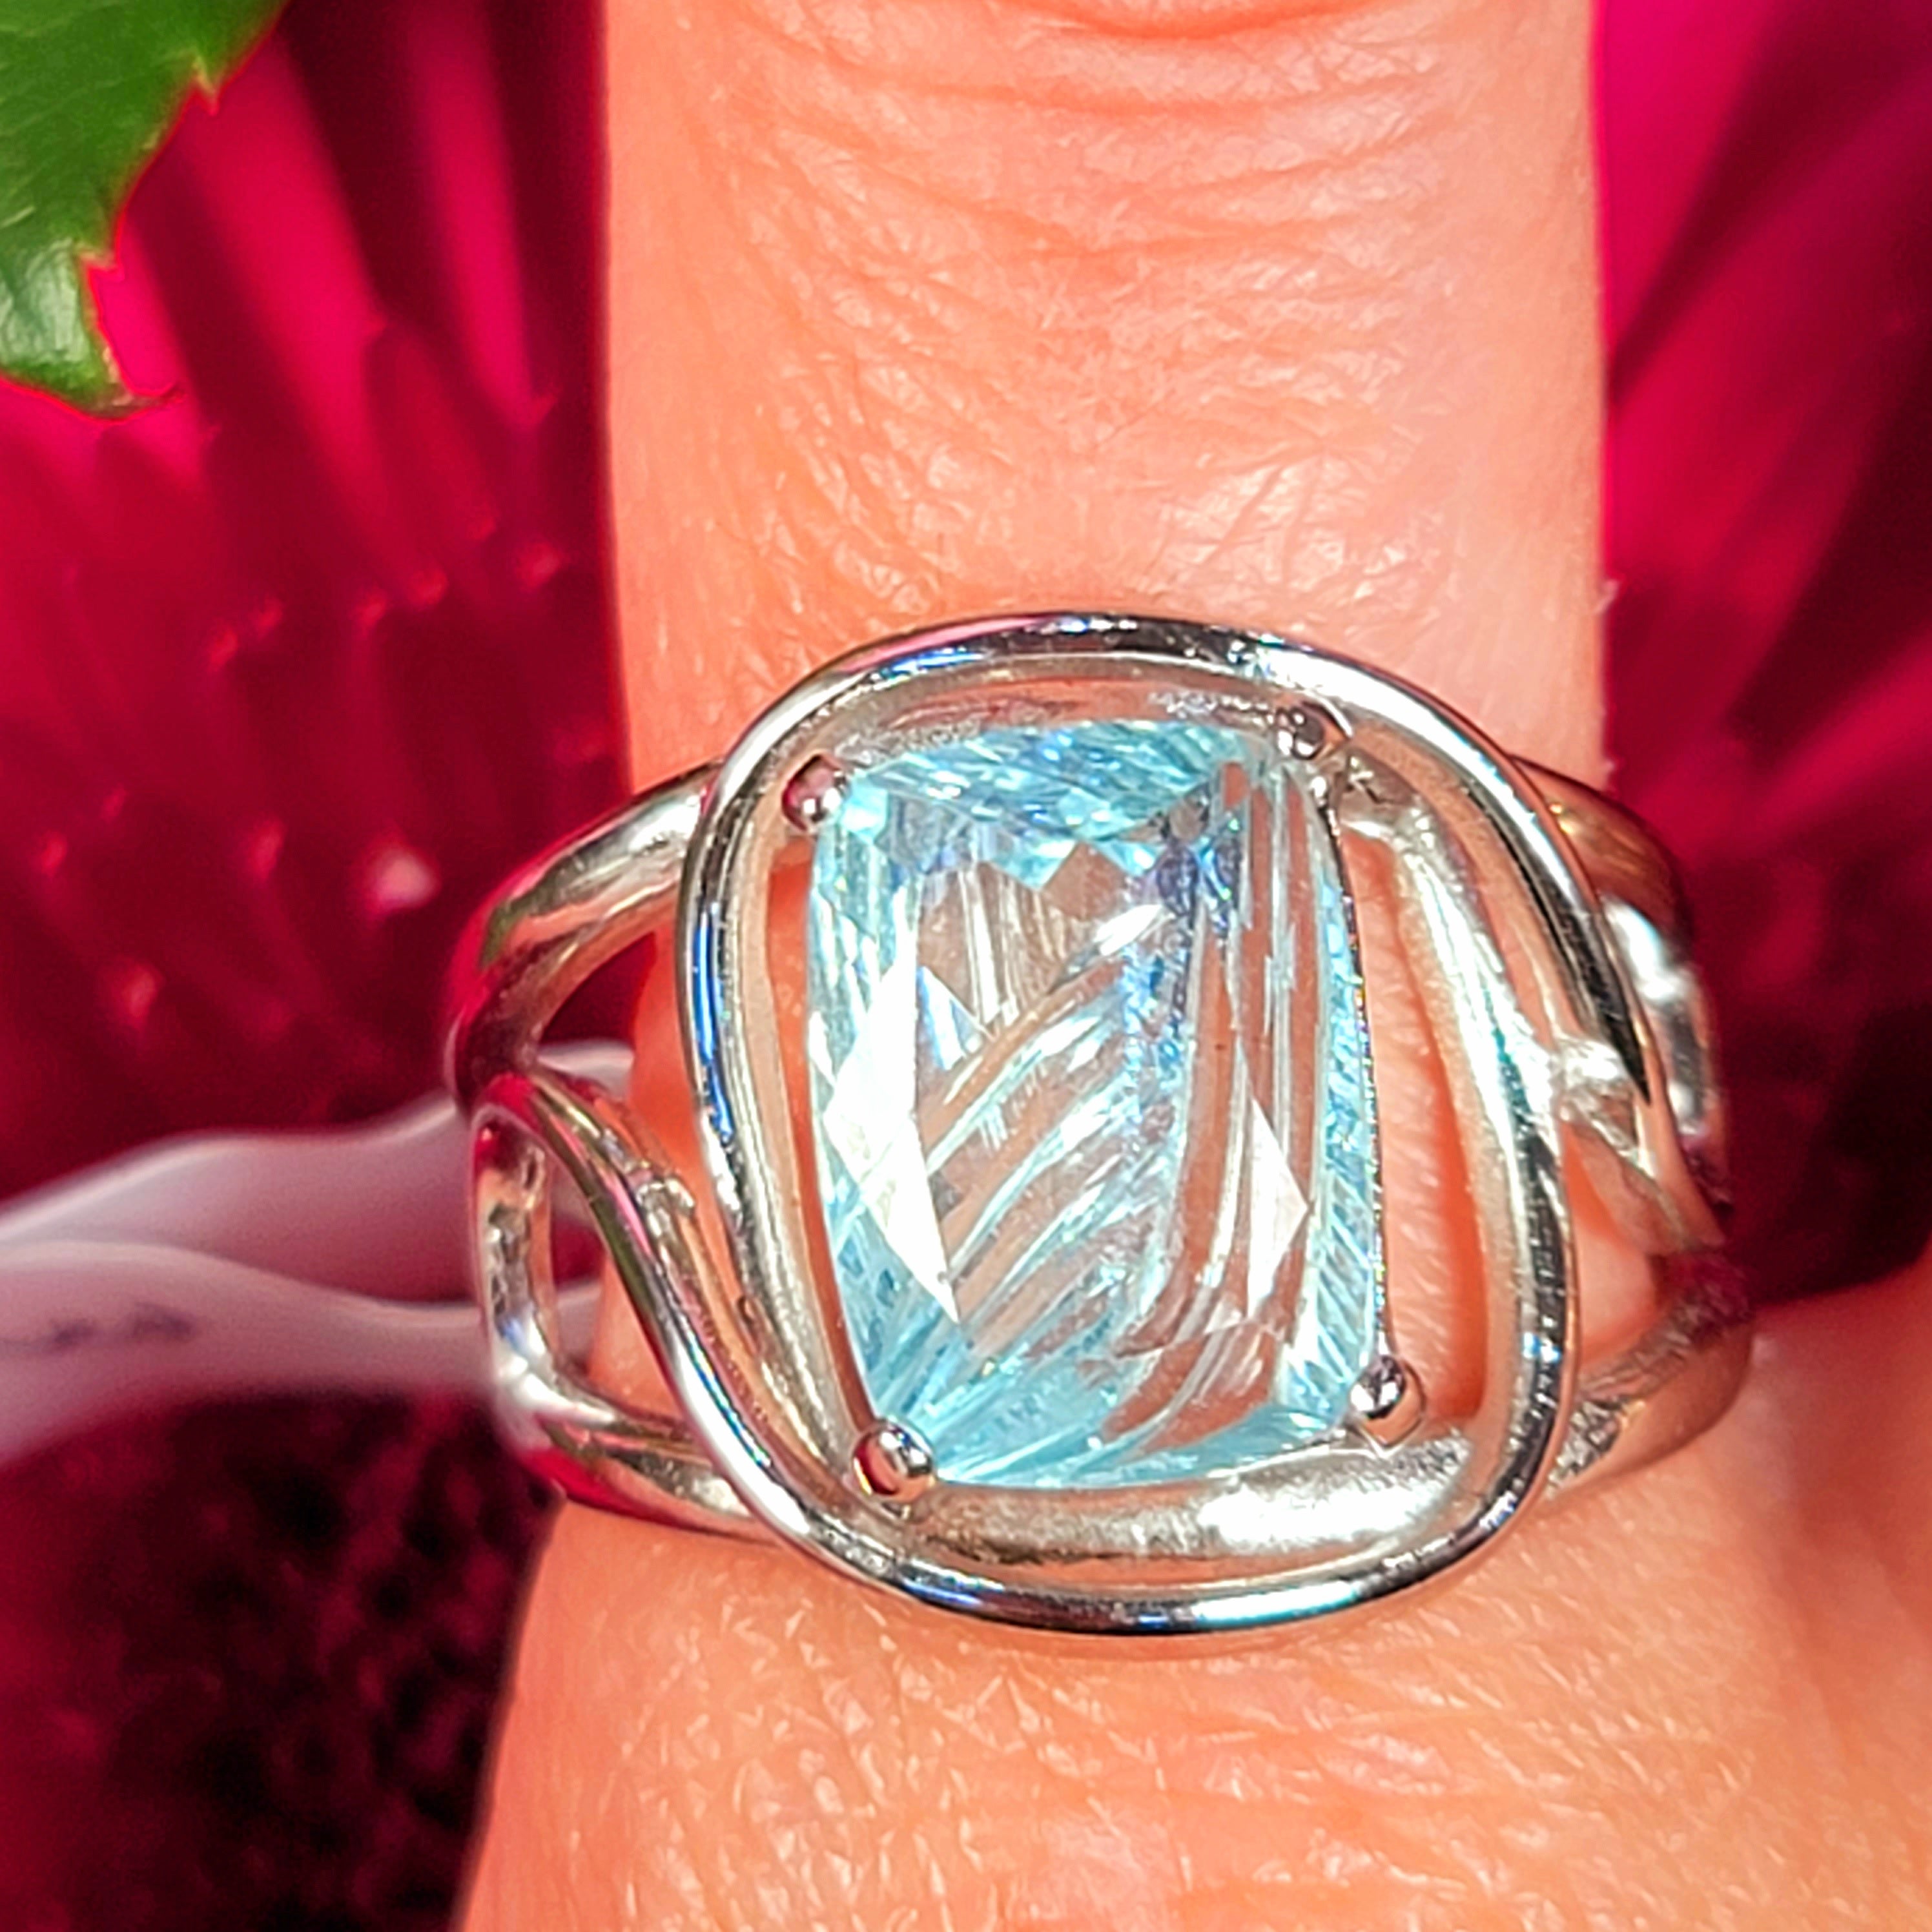 Aquamarine Carved Finger Cuff Adjustable Ring .925 Silver for Improved Communication and Peace